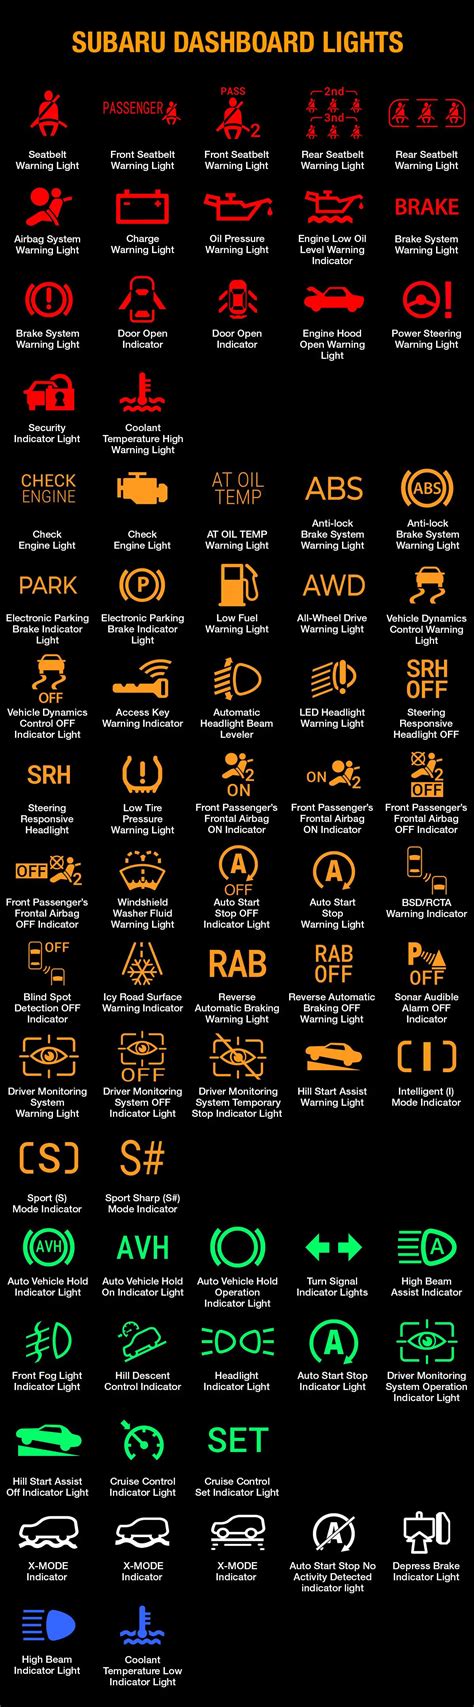 Subaru Dashboard Lights And Meanings Full List Free Download Dash